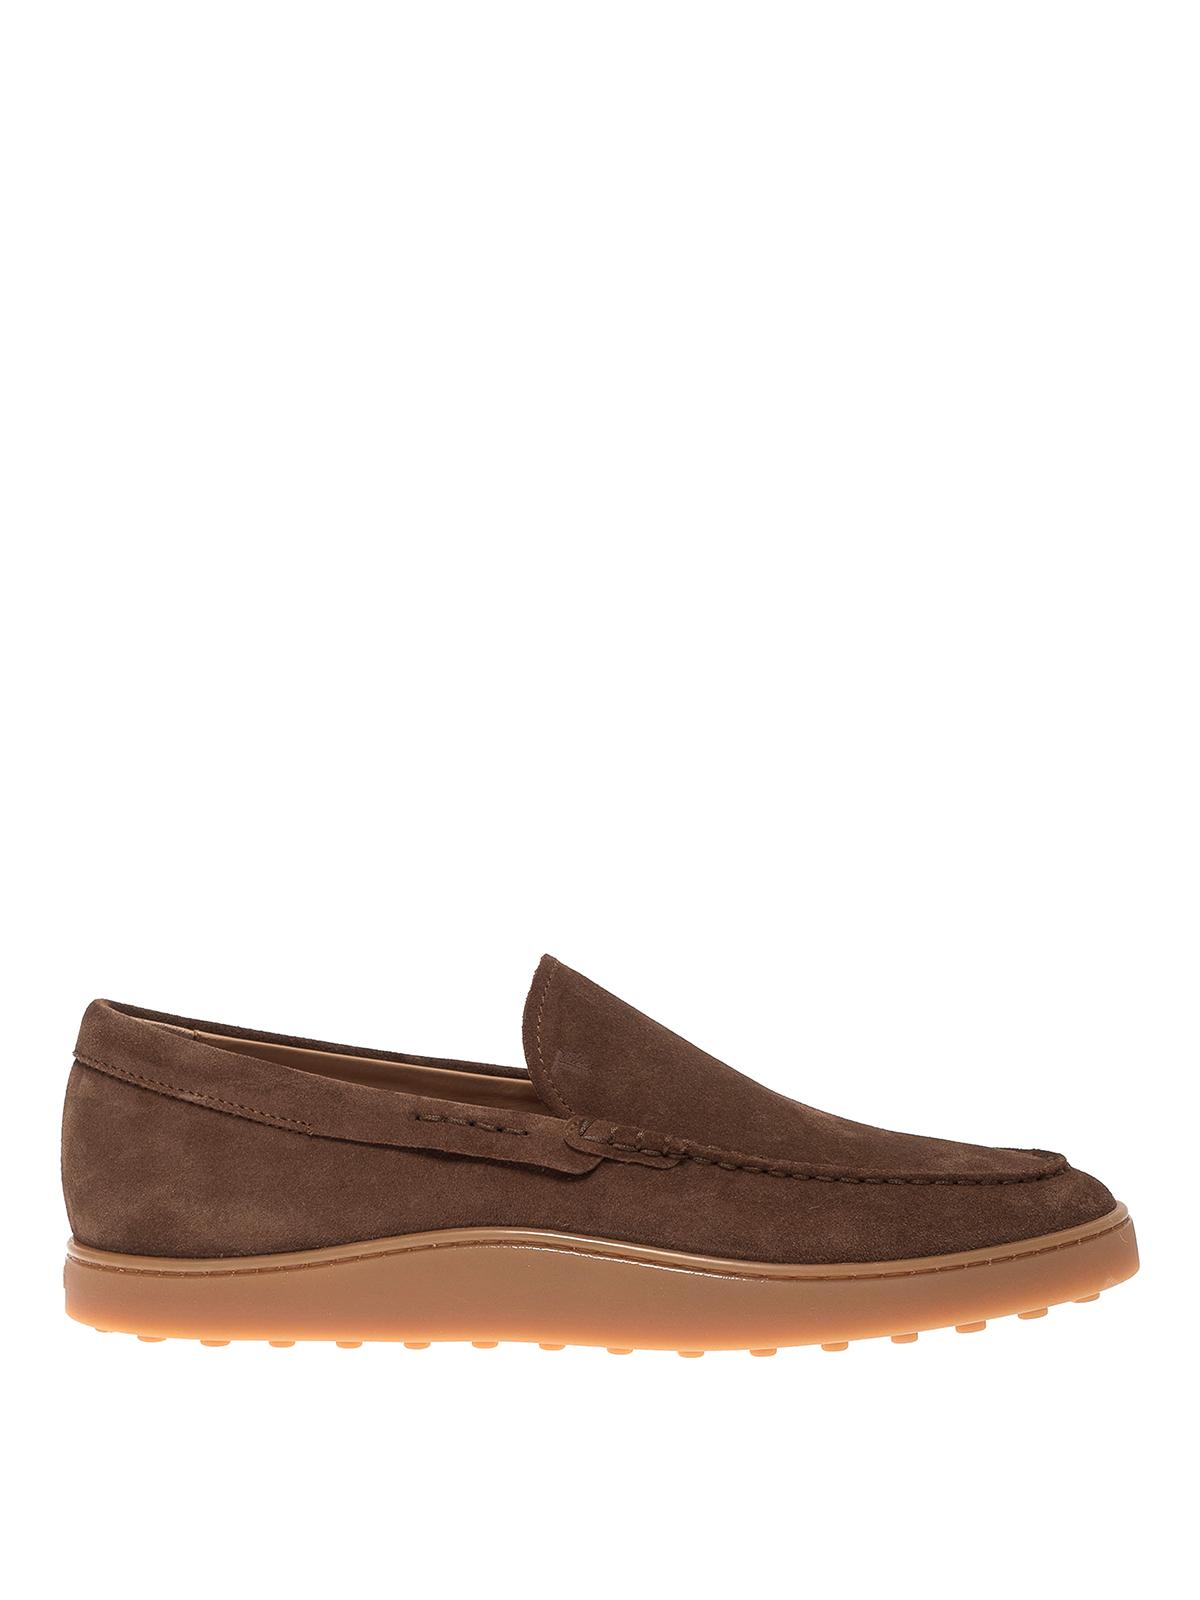 Tod's Gommino Brown Suede Loafers for Men - Lyst